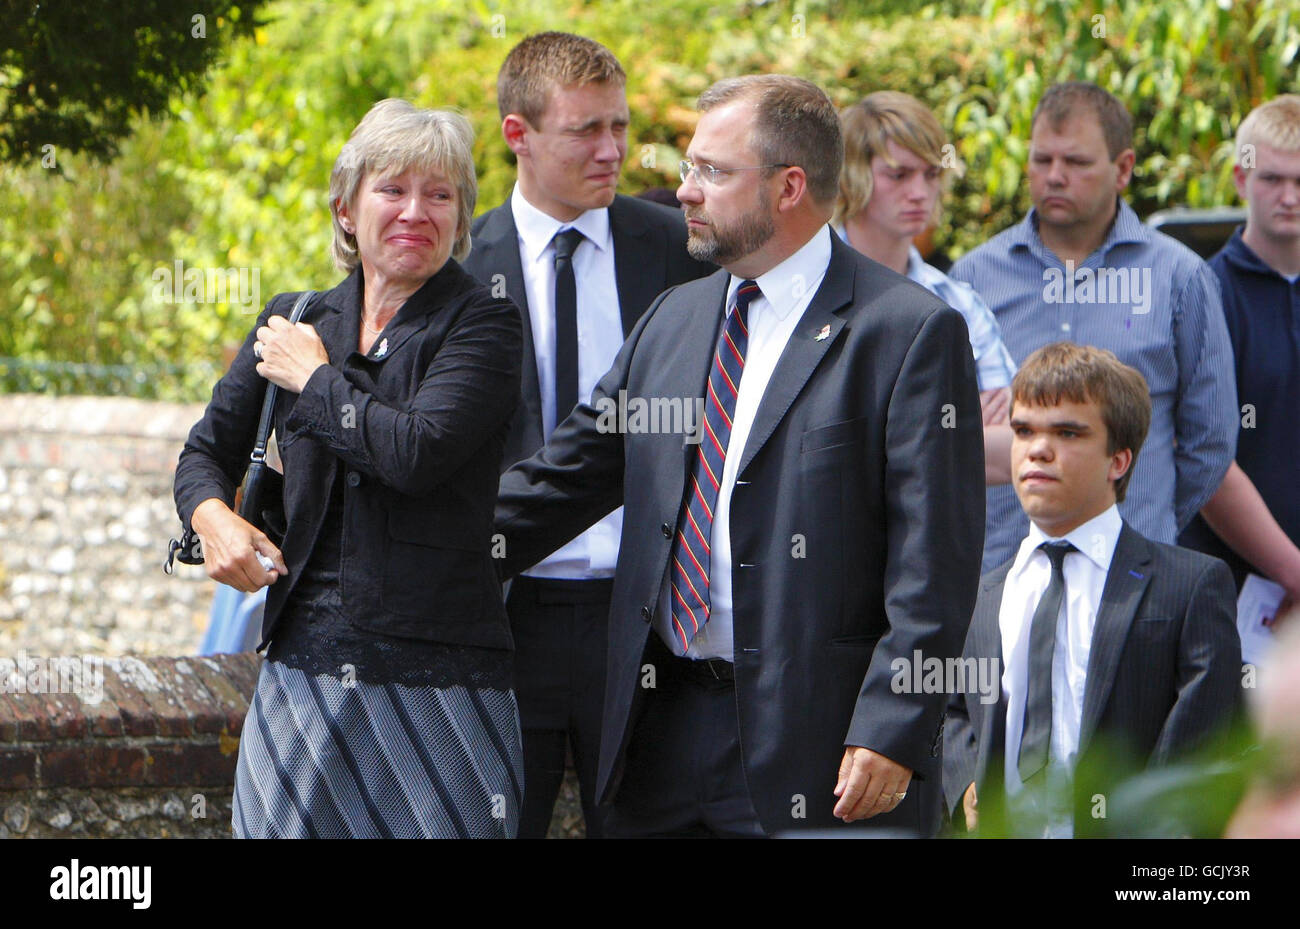 Parents Jenny and Robin Hollington (front) with sons Nick (right) and Charlie (back middle) at the funeral of their eldest son Royal Marine Richard Hollington in the village of Steep in Hampshire. The 23 year old was the 300th soldier to die in the Afghanistan conflict. He passed away on Father's Day at Queen Elizabeth Hospital in Birmingham, eight days after being wounded on patrol in Sangin Province while serving with 40 Commando. Stock Photo